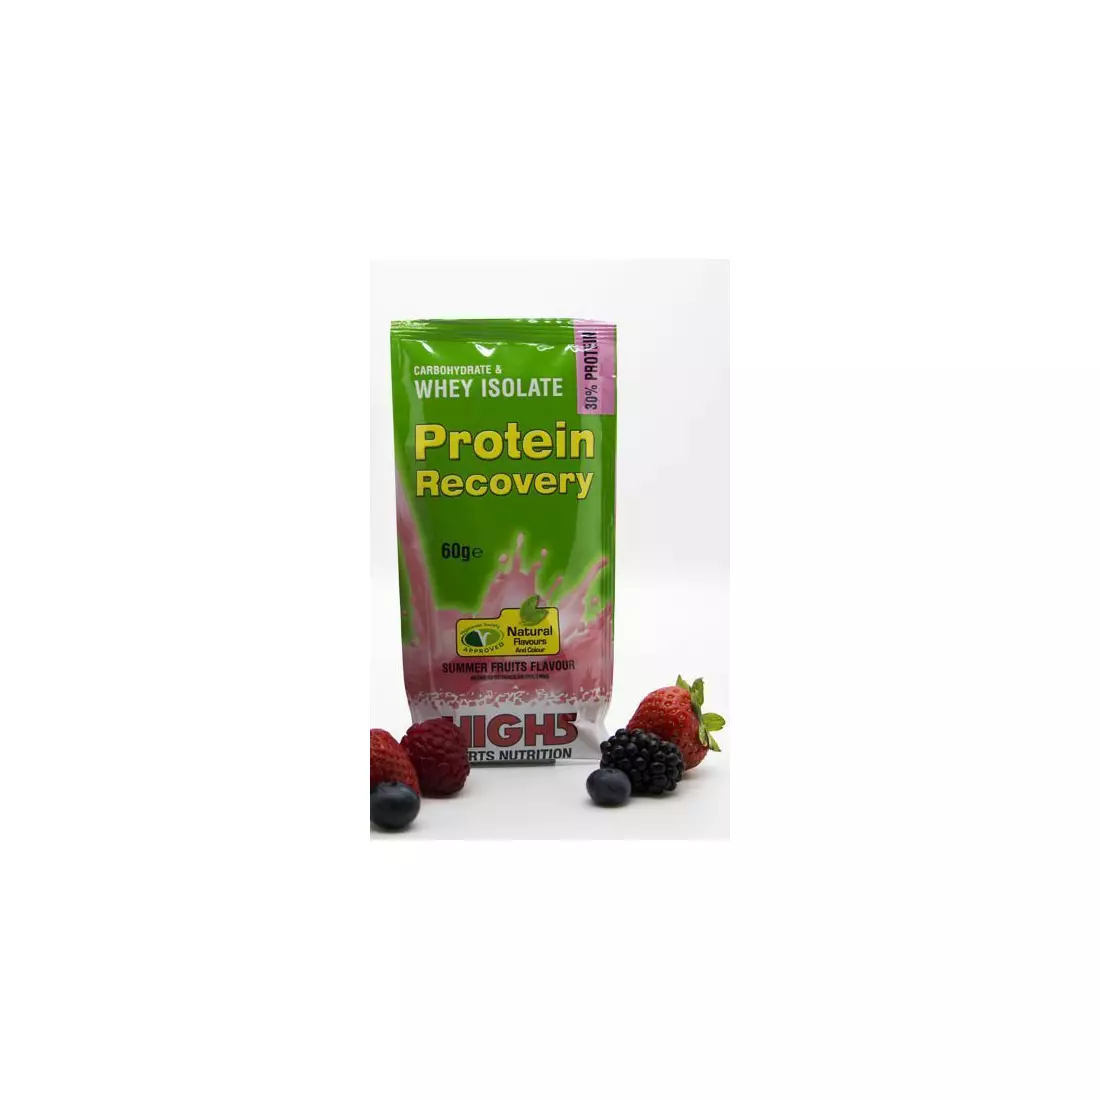 HIGH5 PROTEIN RECOVERY protein drink powder to dissolve, sachet 60 g flavor: SUMMER FRUITS